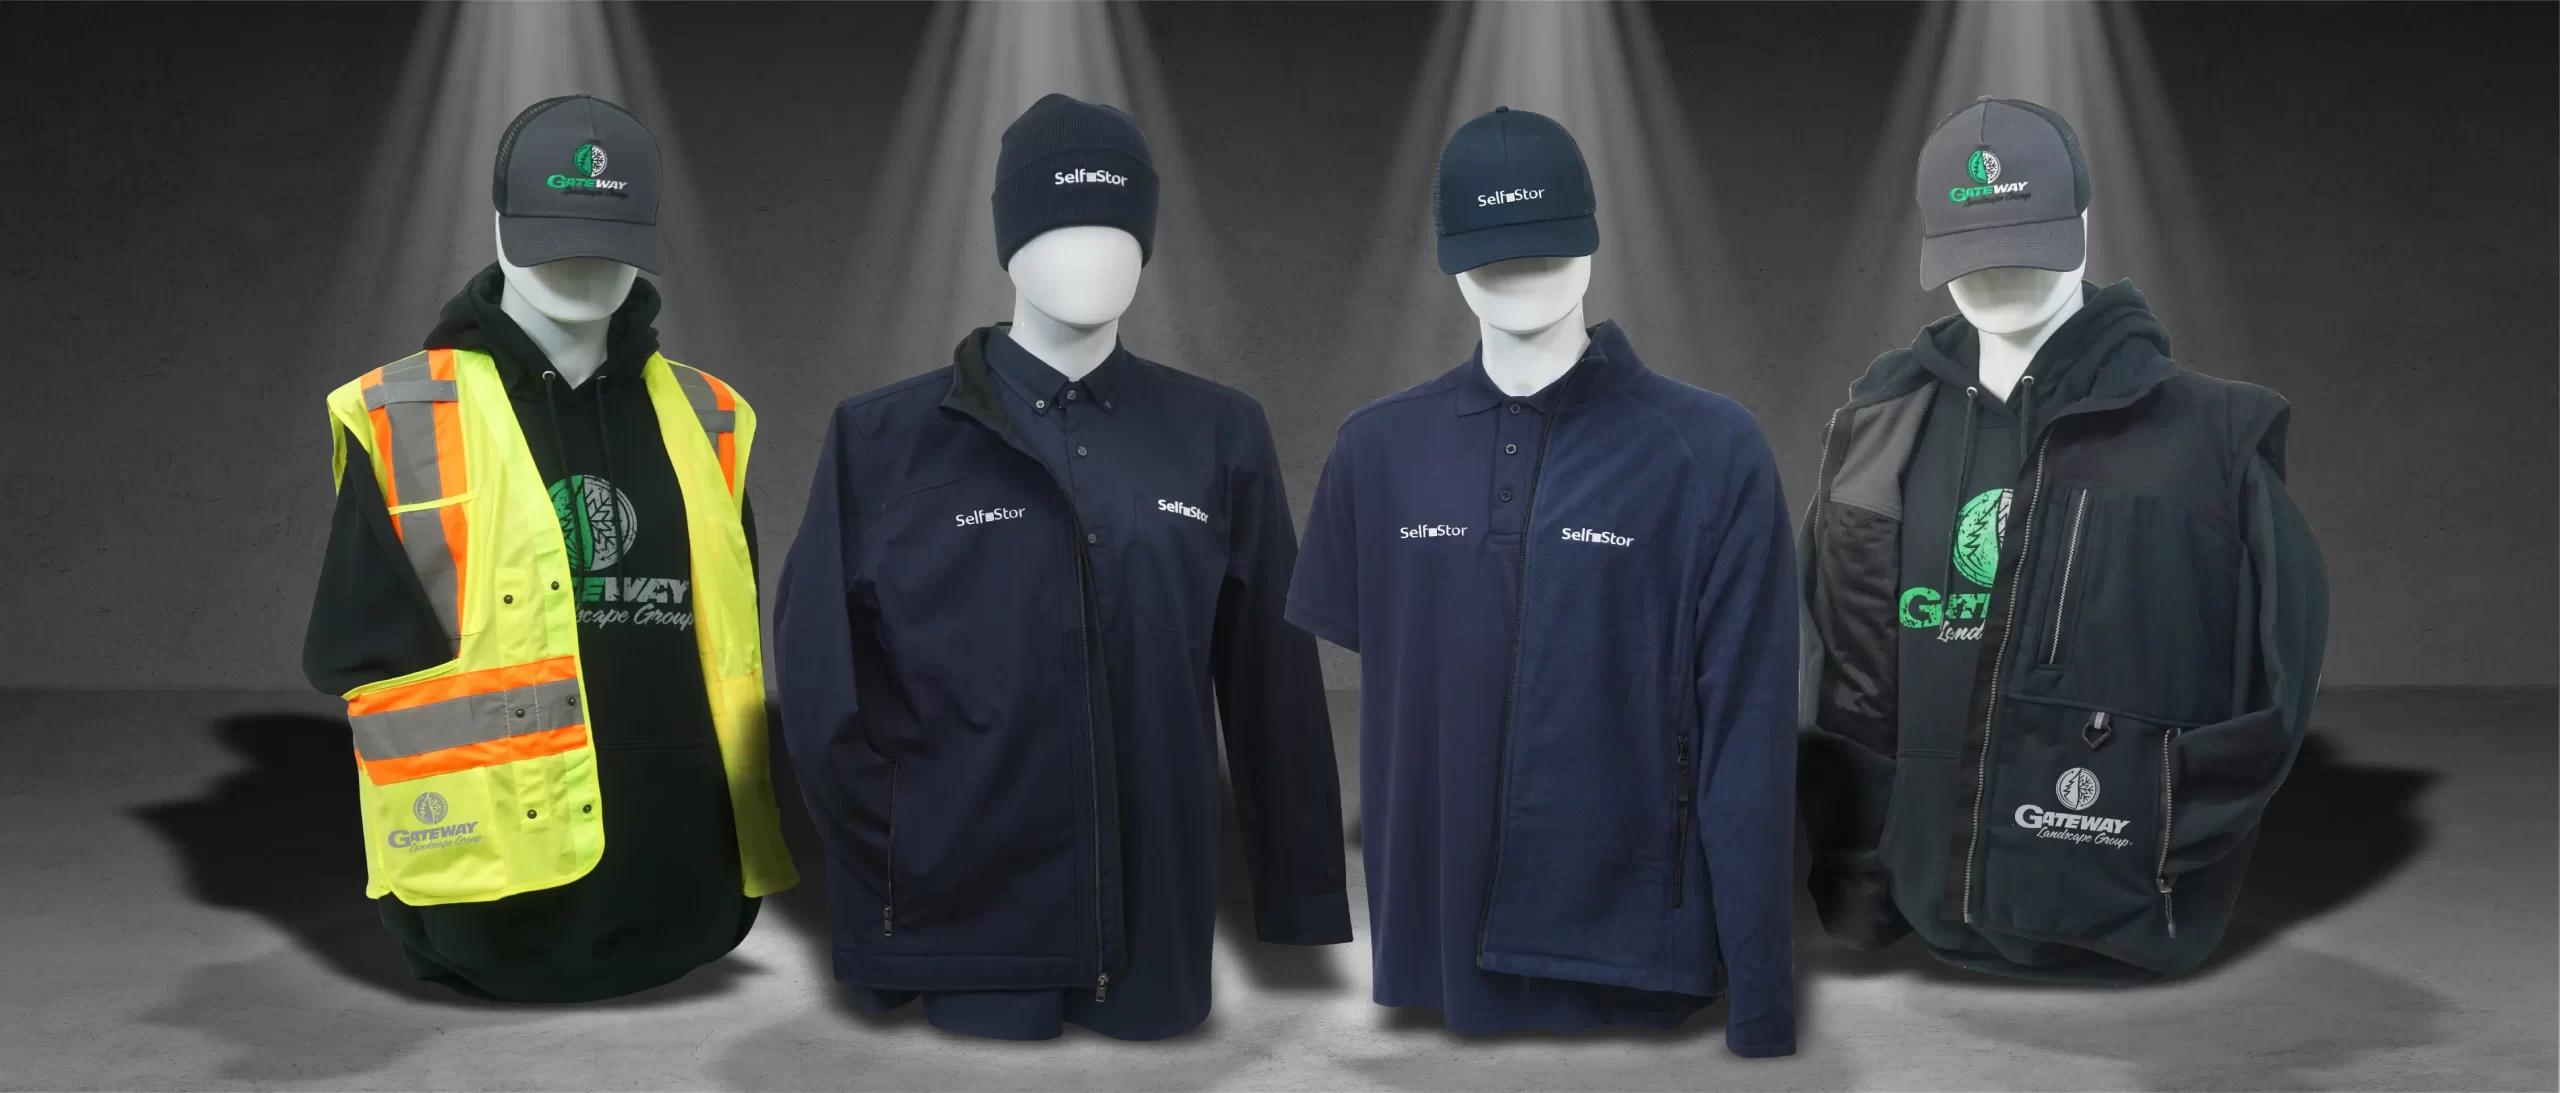 Work Clothes with logo - Workwear Toronto - Corporate Apparel with company Logo in GTA Toronto - Embroidery